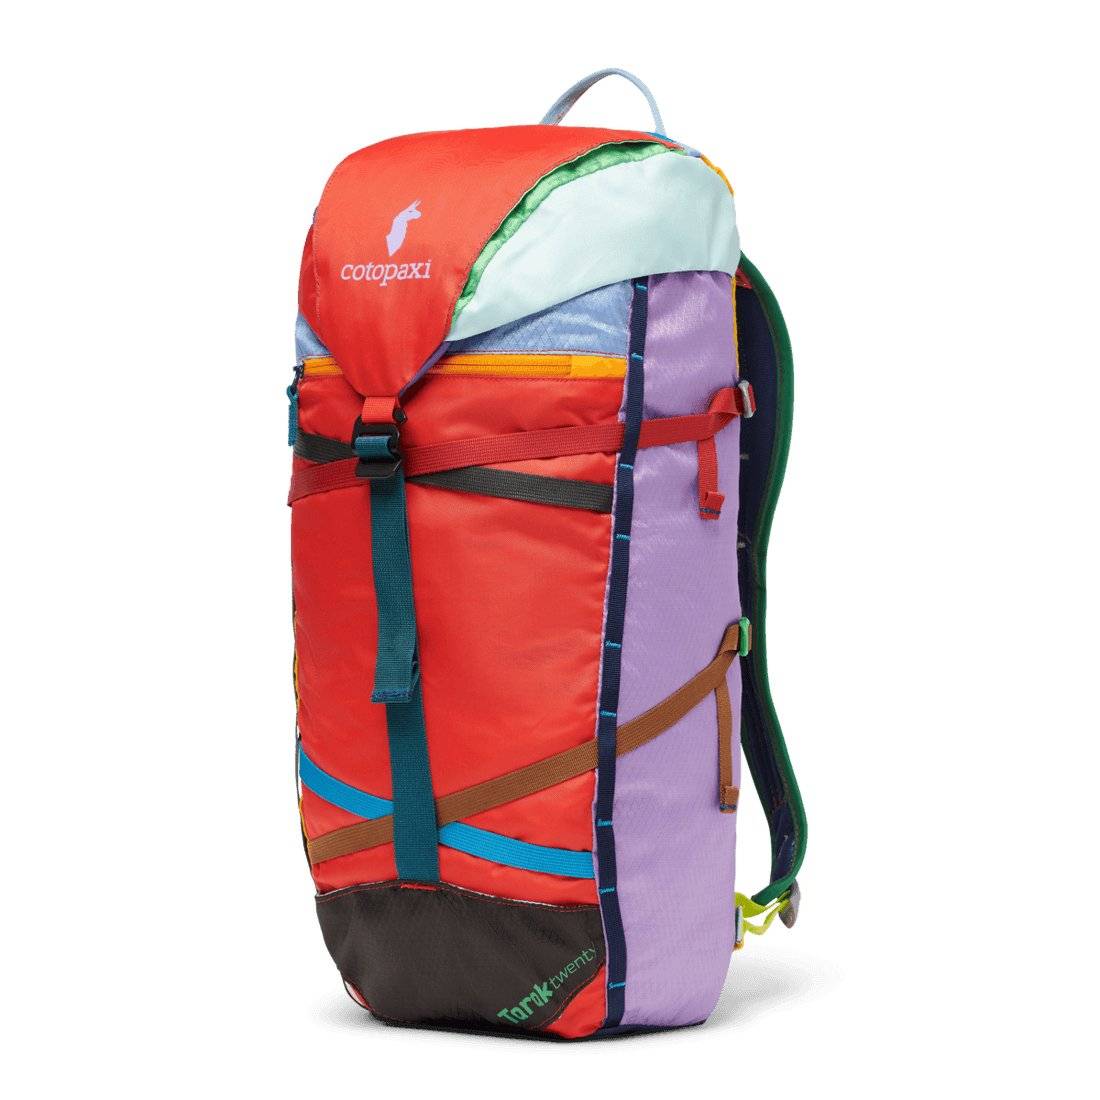 Tarak 20L Backpack - The Shoe Collective